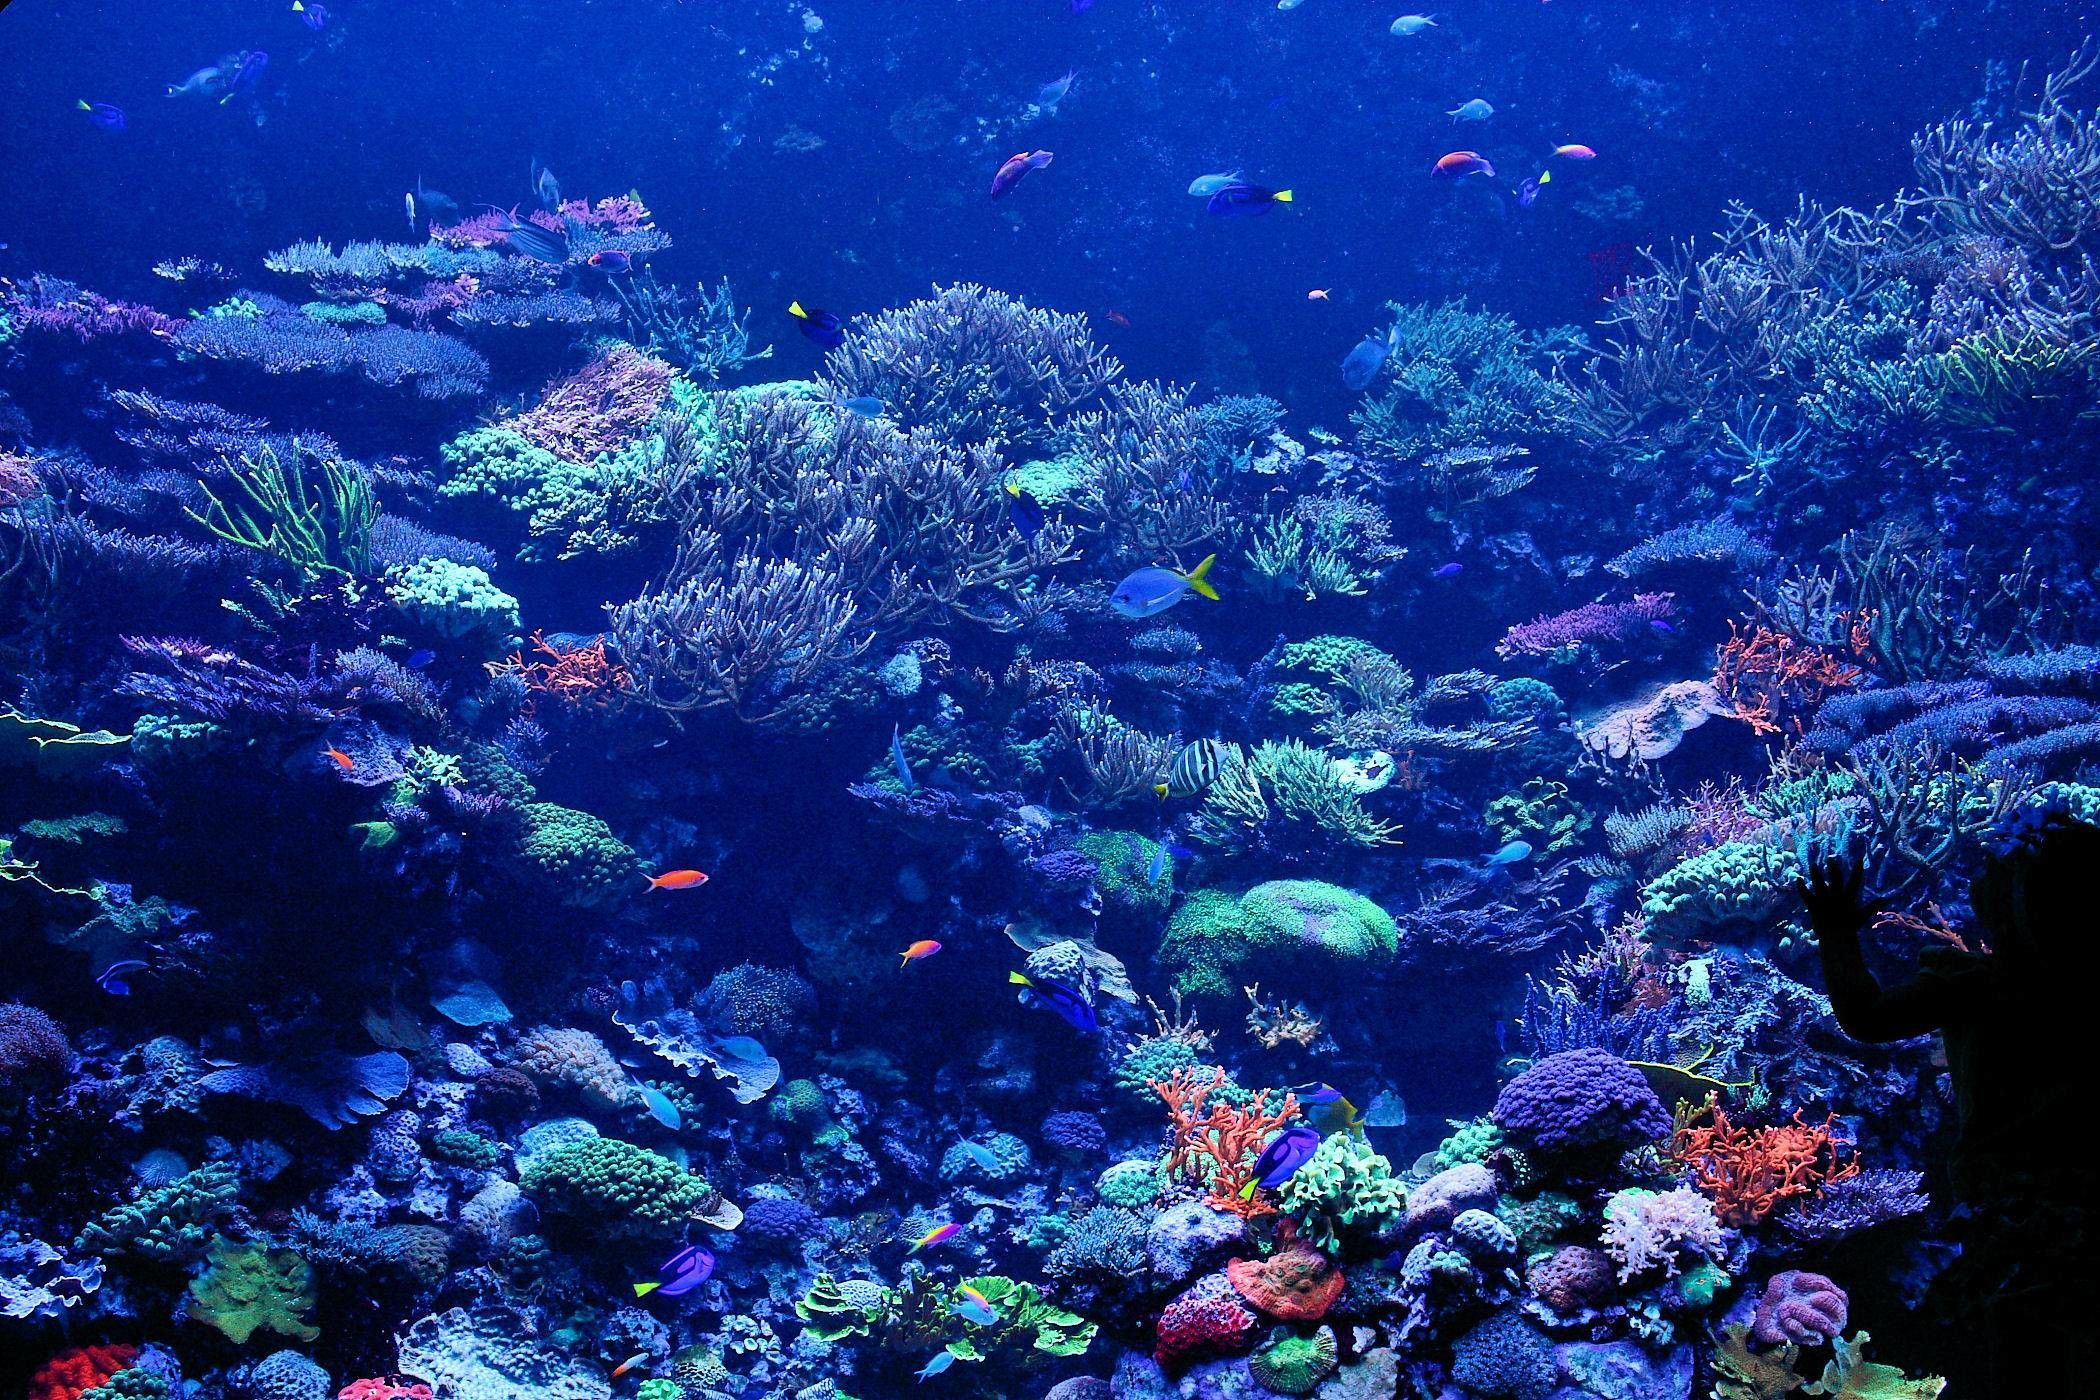 A coral reef with many different types of coral and fish swimming around. - Coral